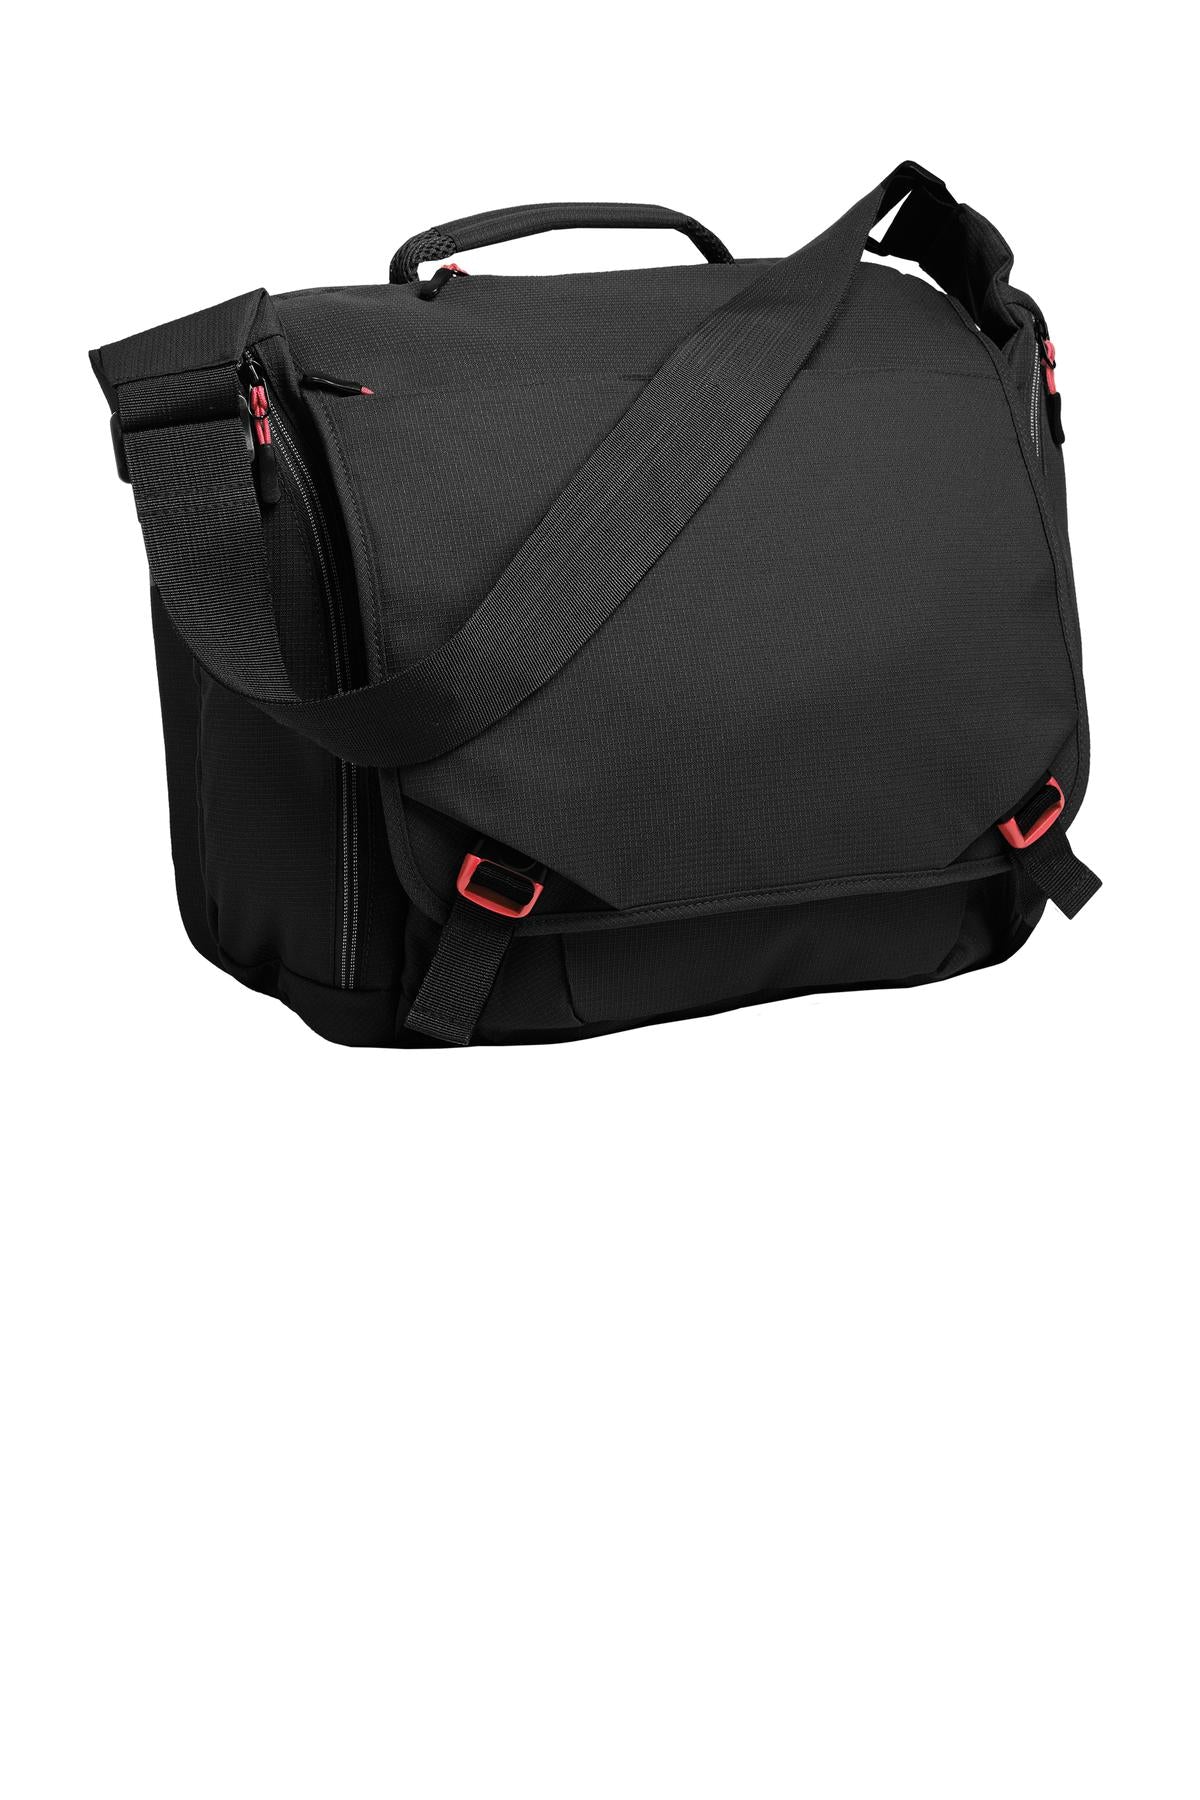 Bags Black/ Red OSFA Port Authority